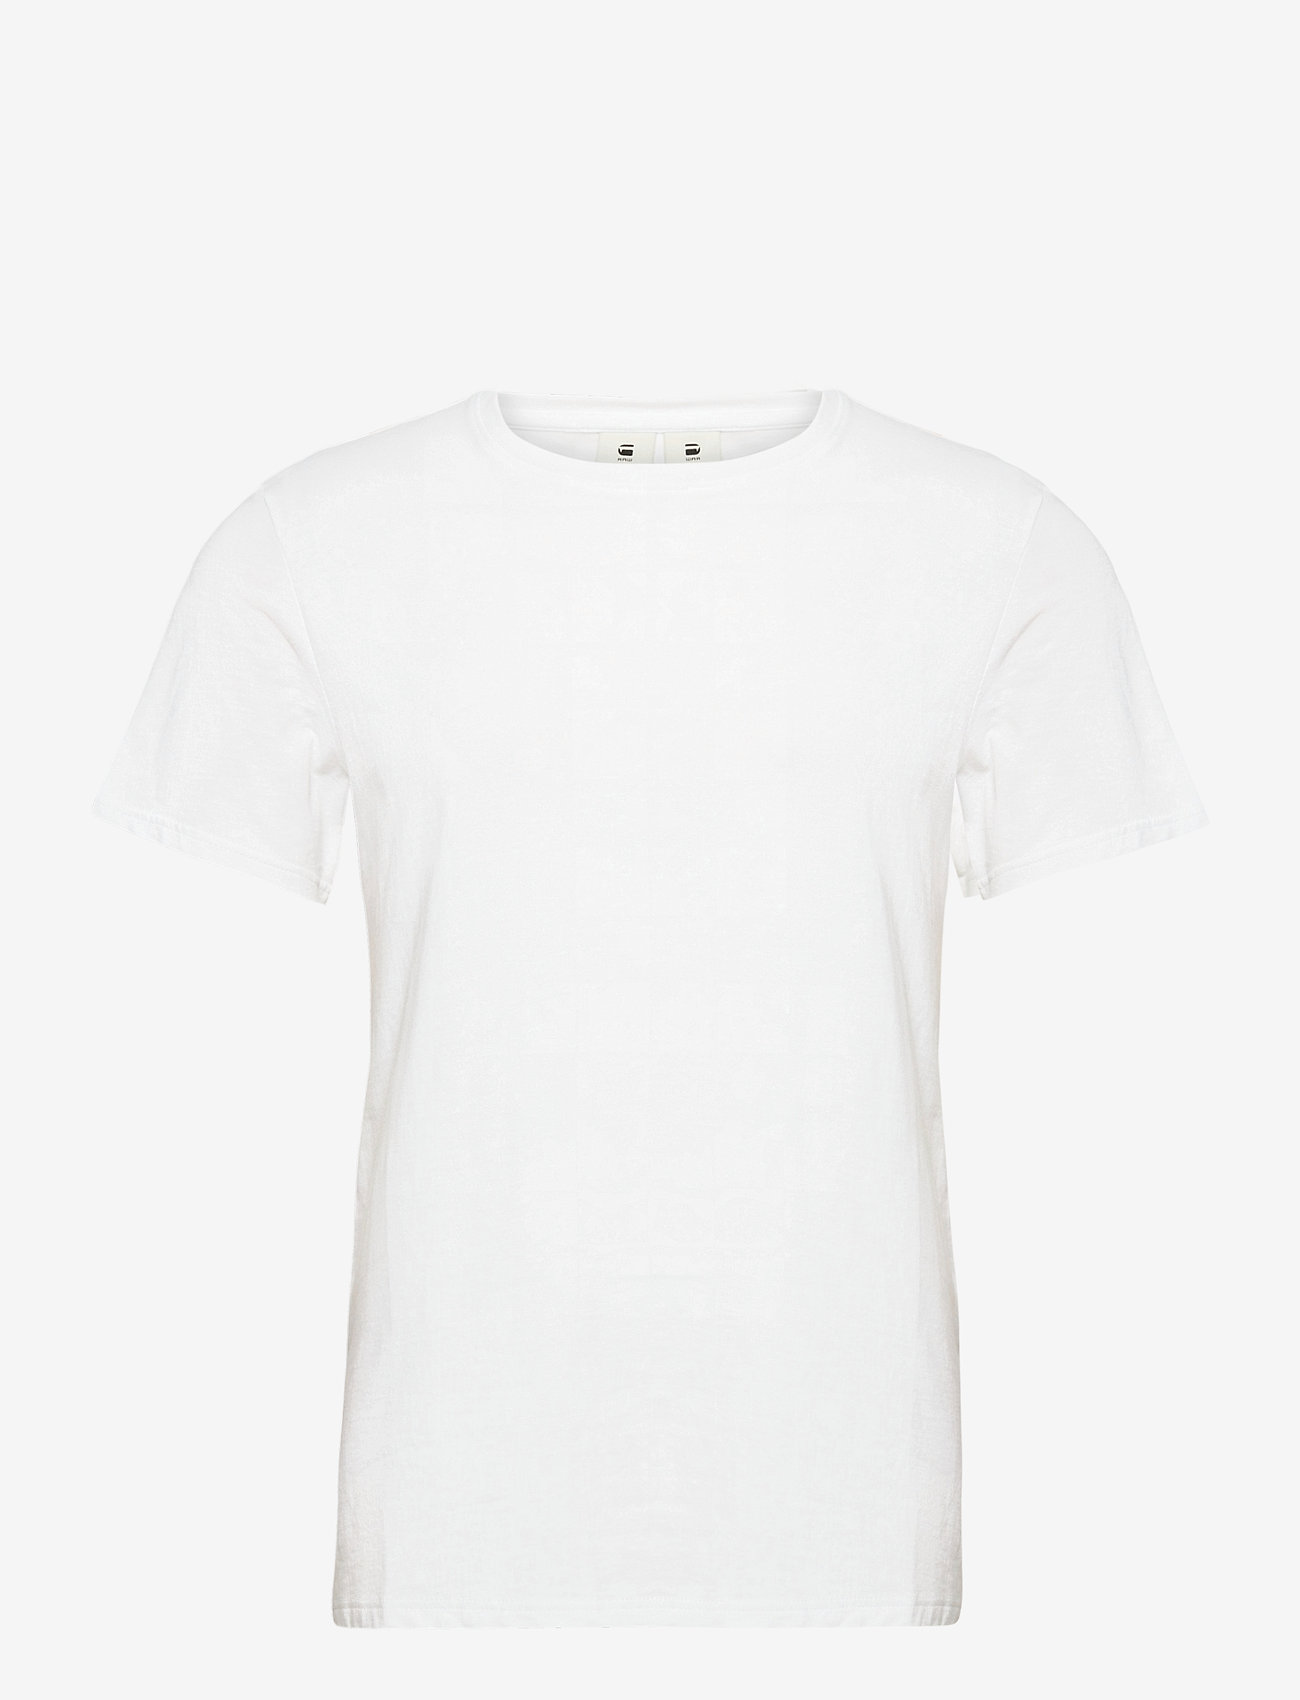 G-Star RAW - Base-s r t s\s - short-sleeved t-shirts - white - 1